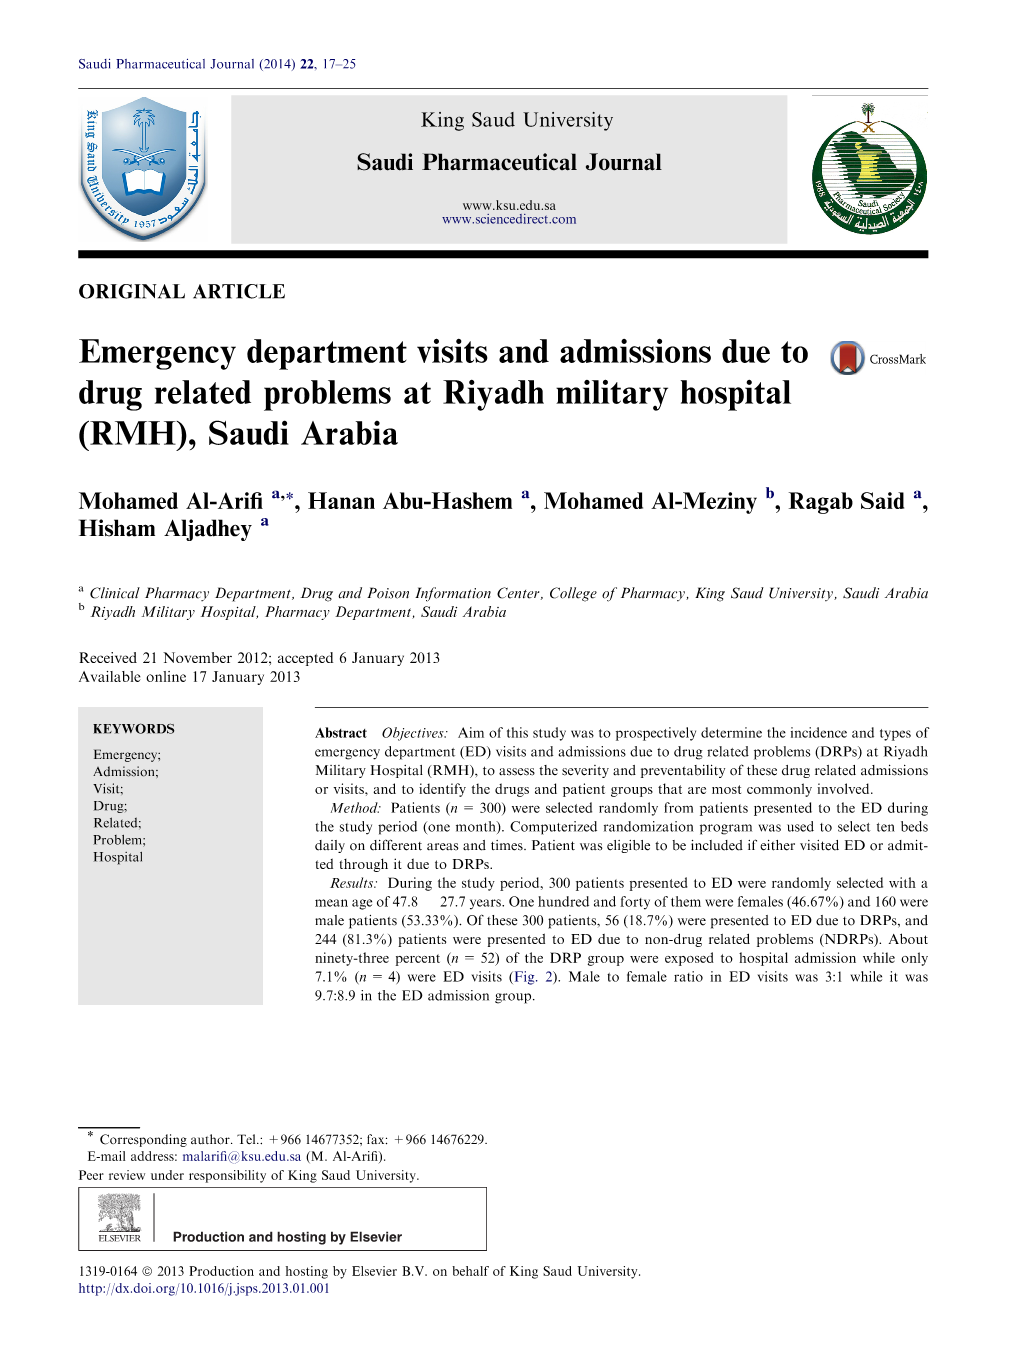 Emergency Department Visits and Admissions Due to Drug Related Problems at Riyadh Military Hospital (RMH), Saudi Arabia